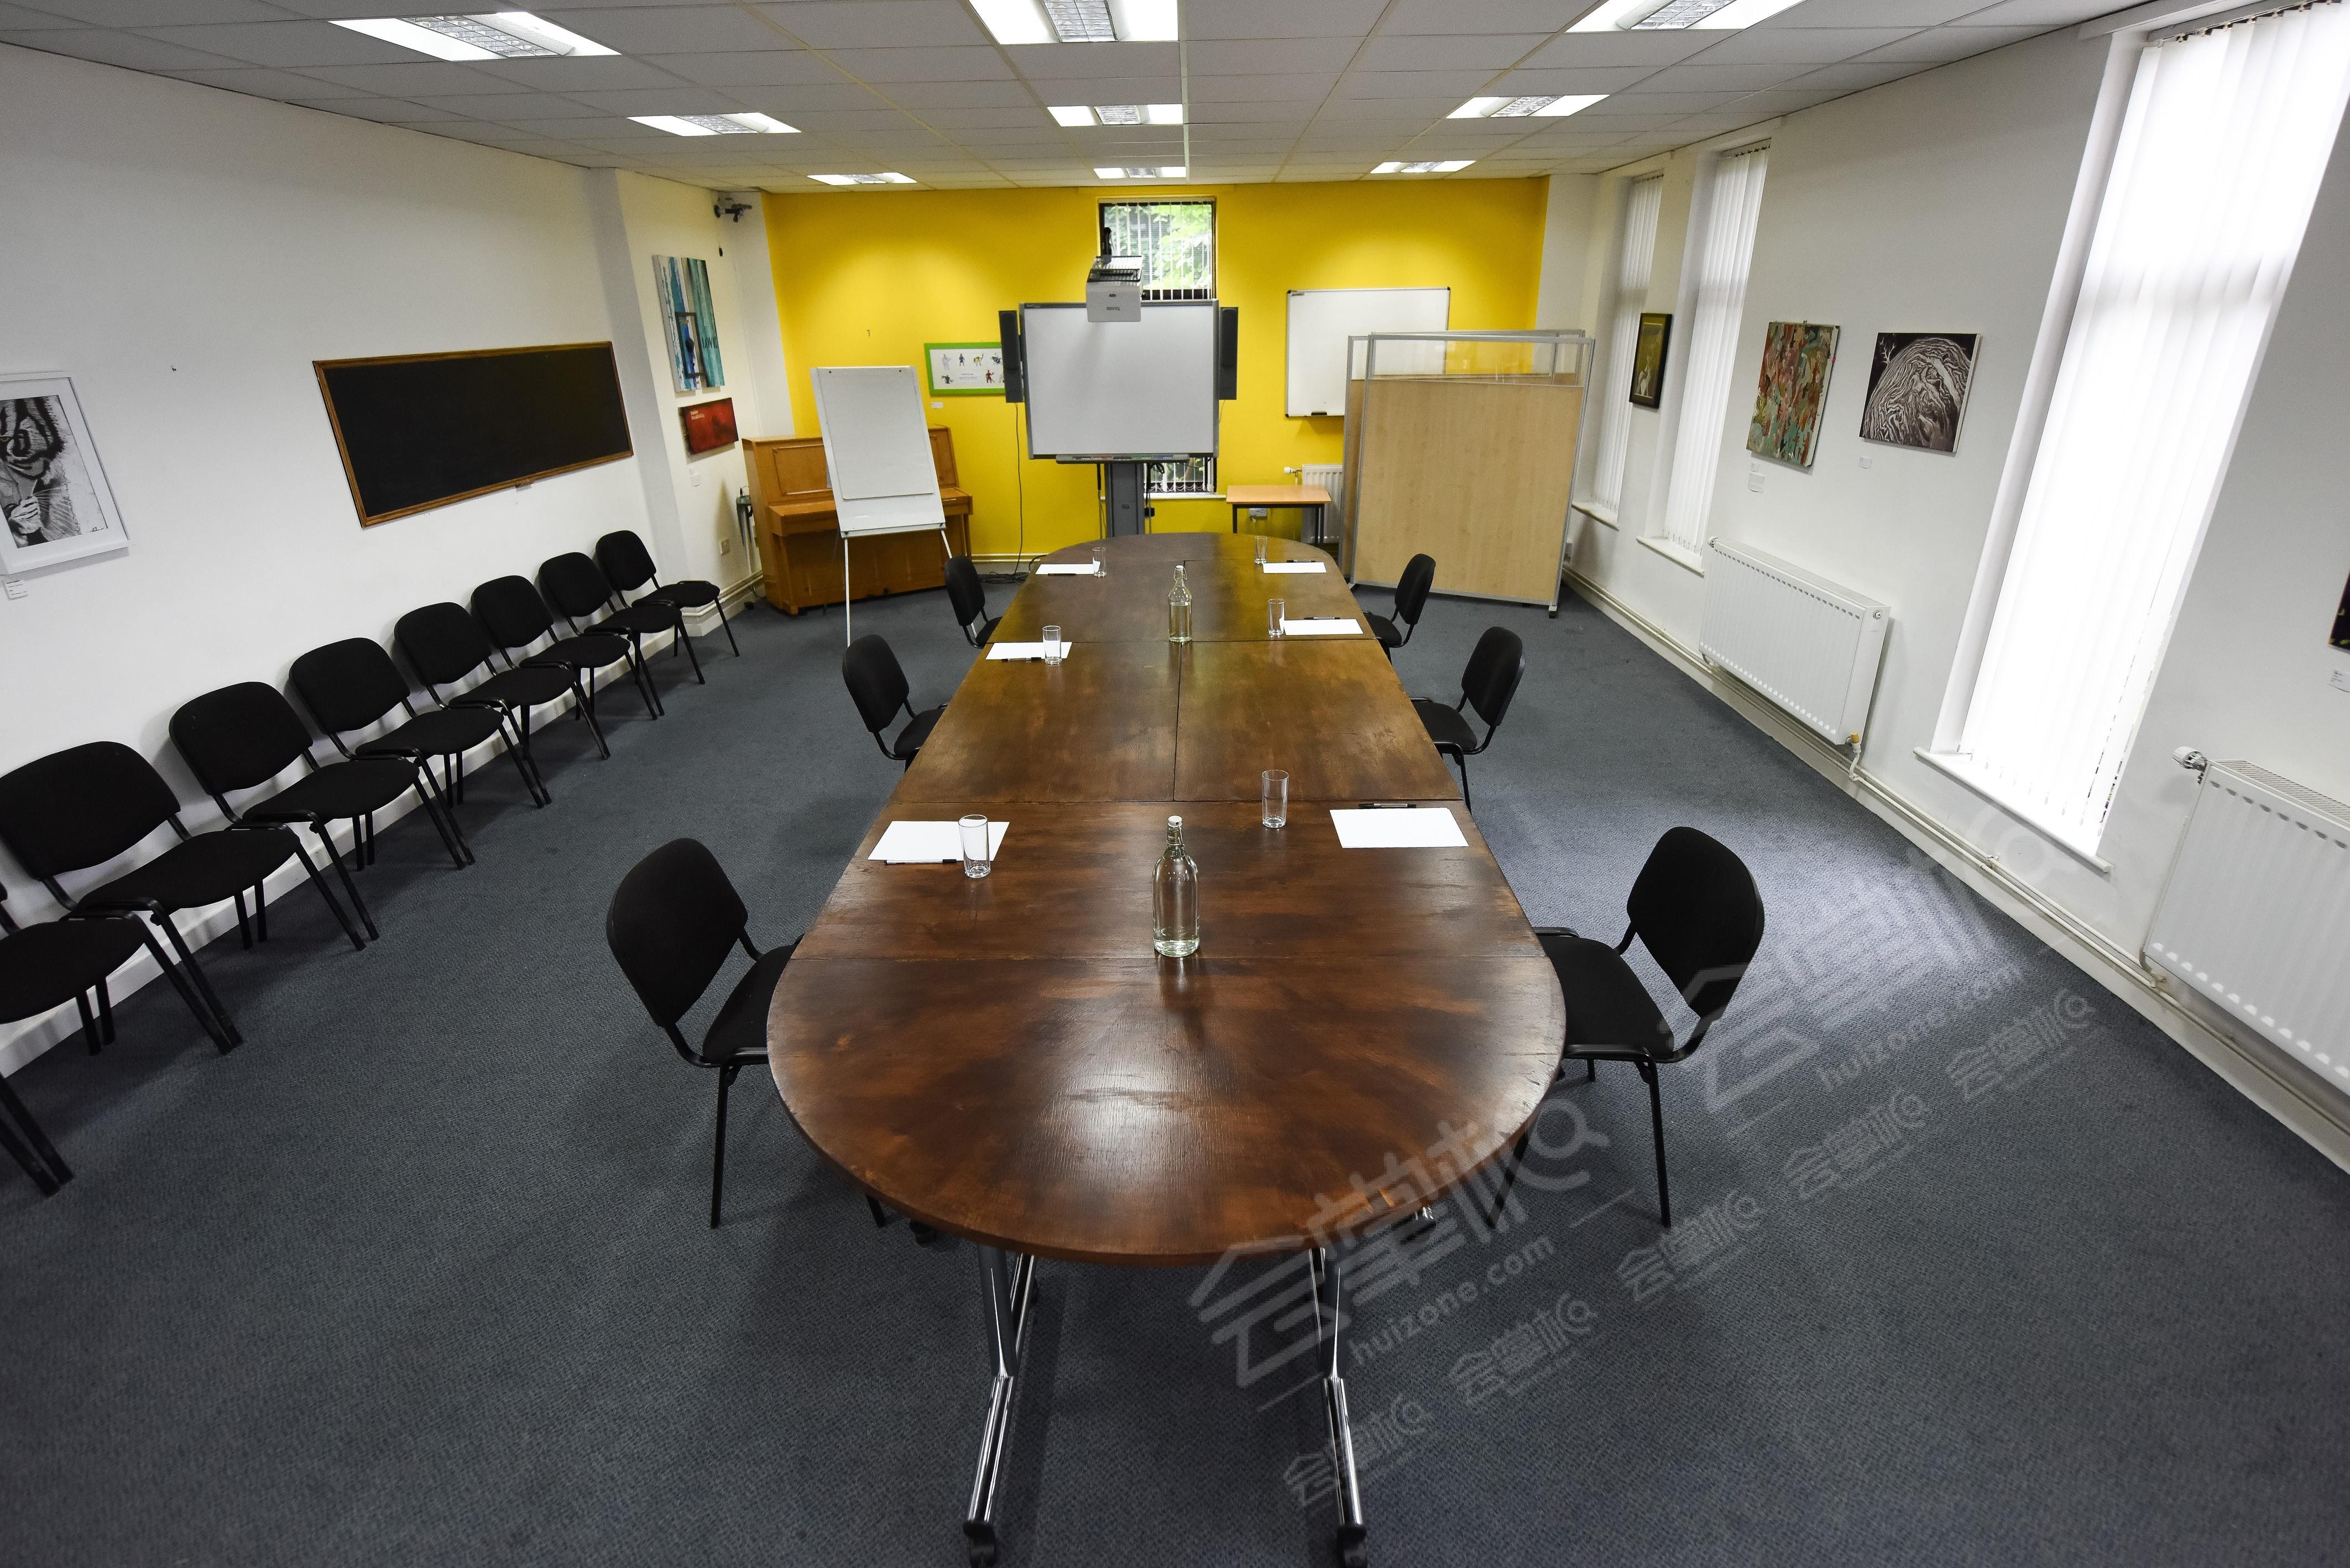 The Meeting Room